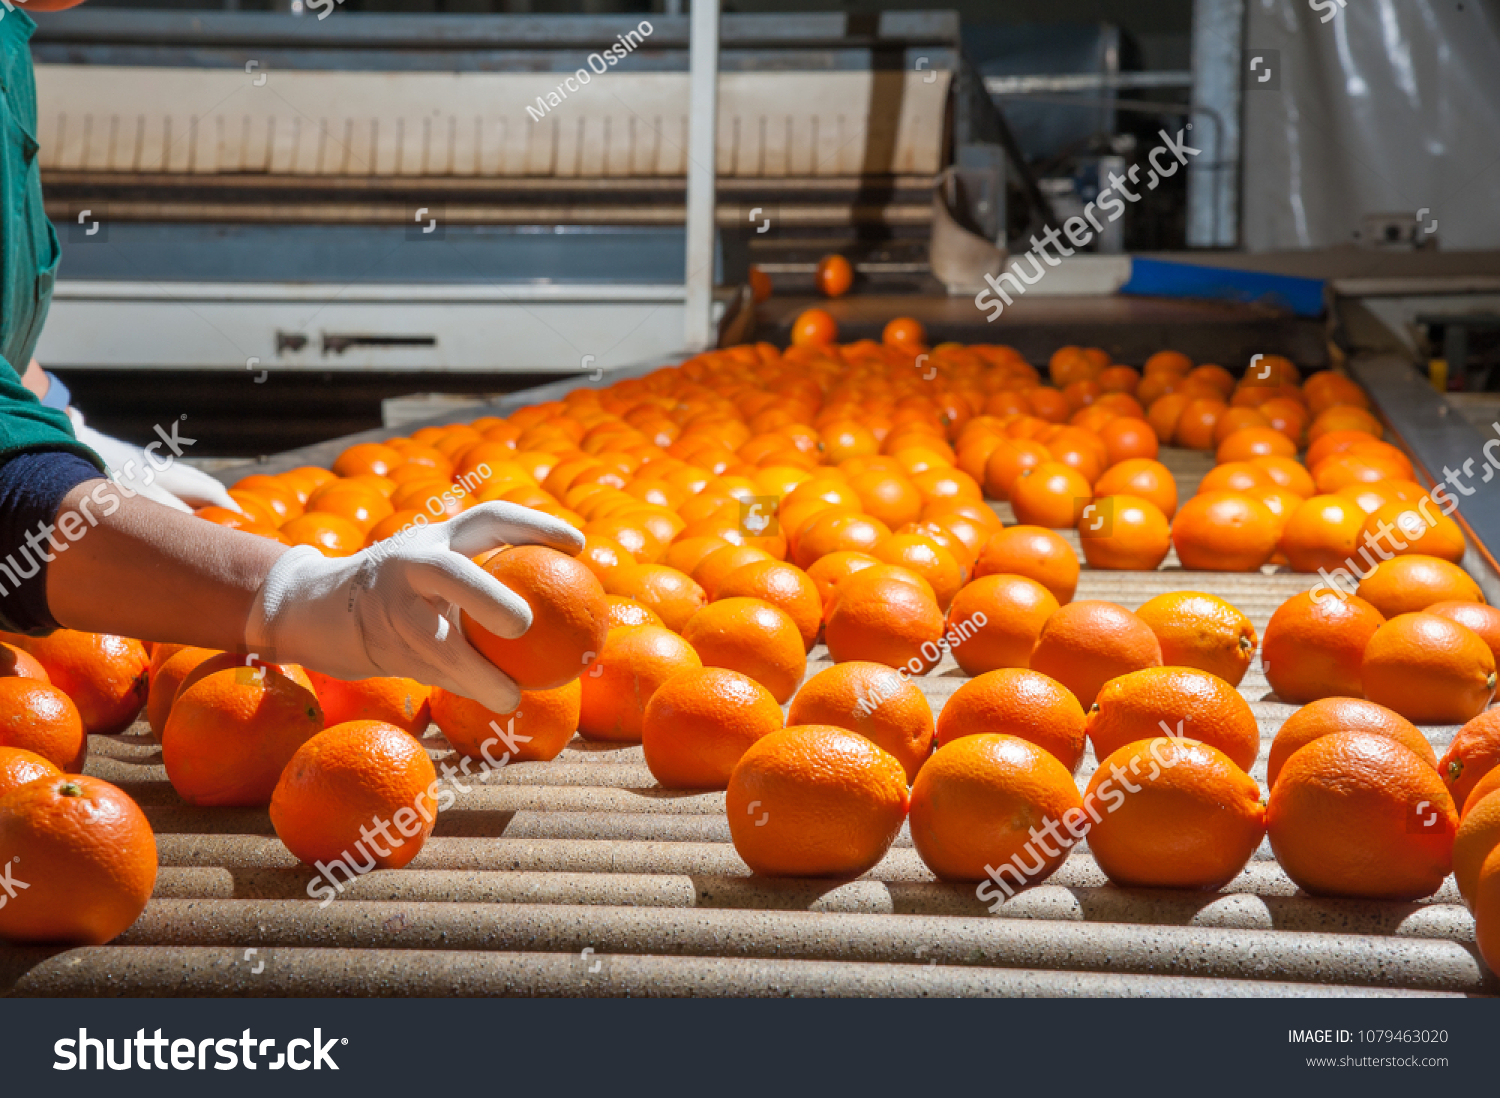 The manual selection of fruits: a worker ckecking oranges to reject the seconde-rate ones #1079463020